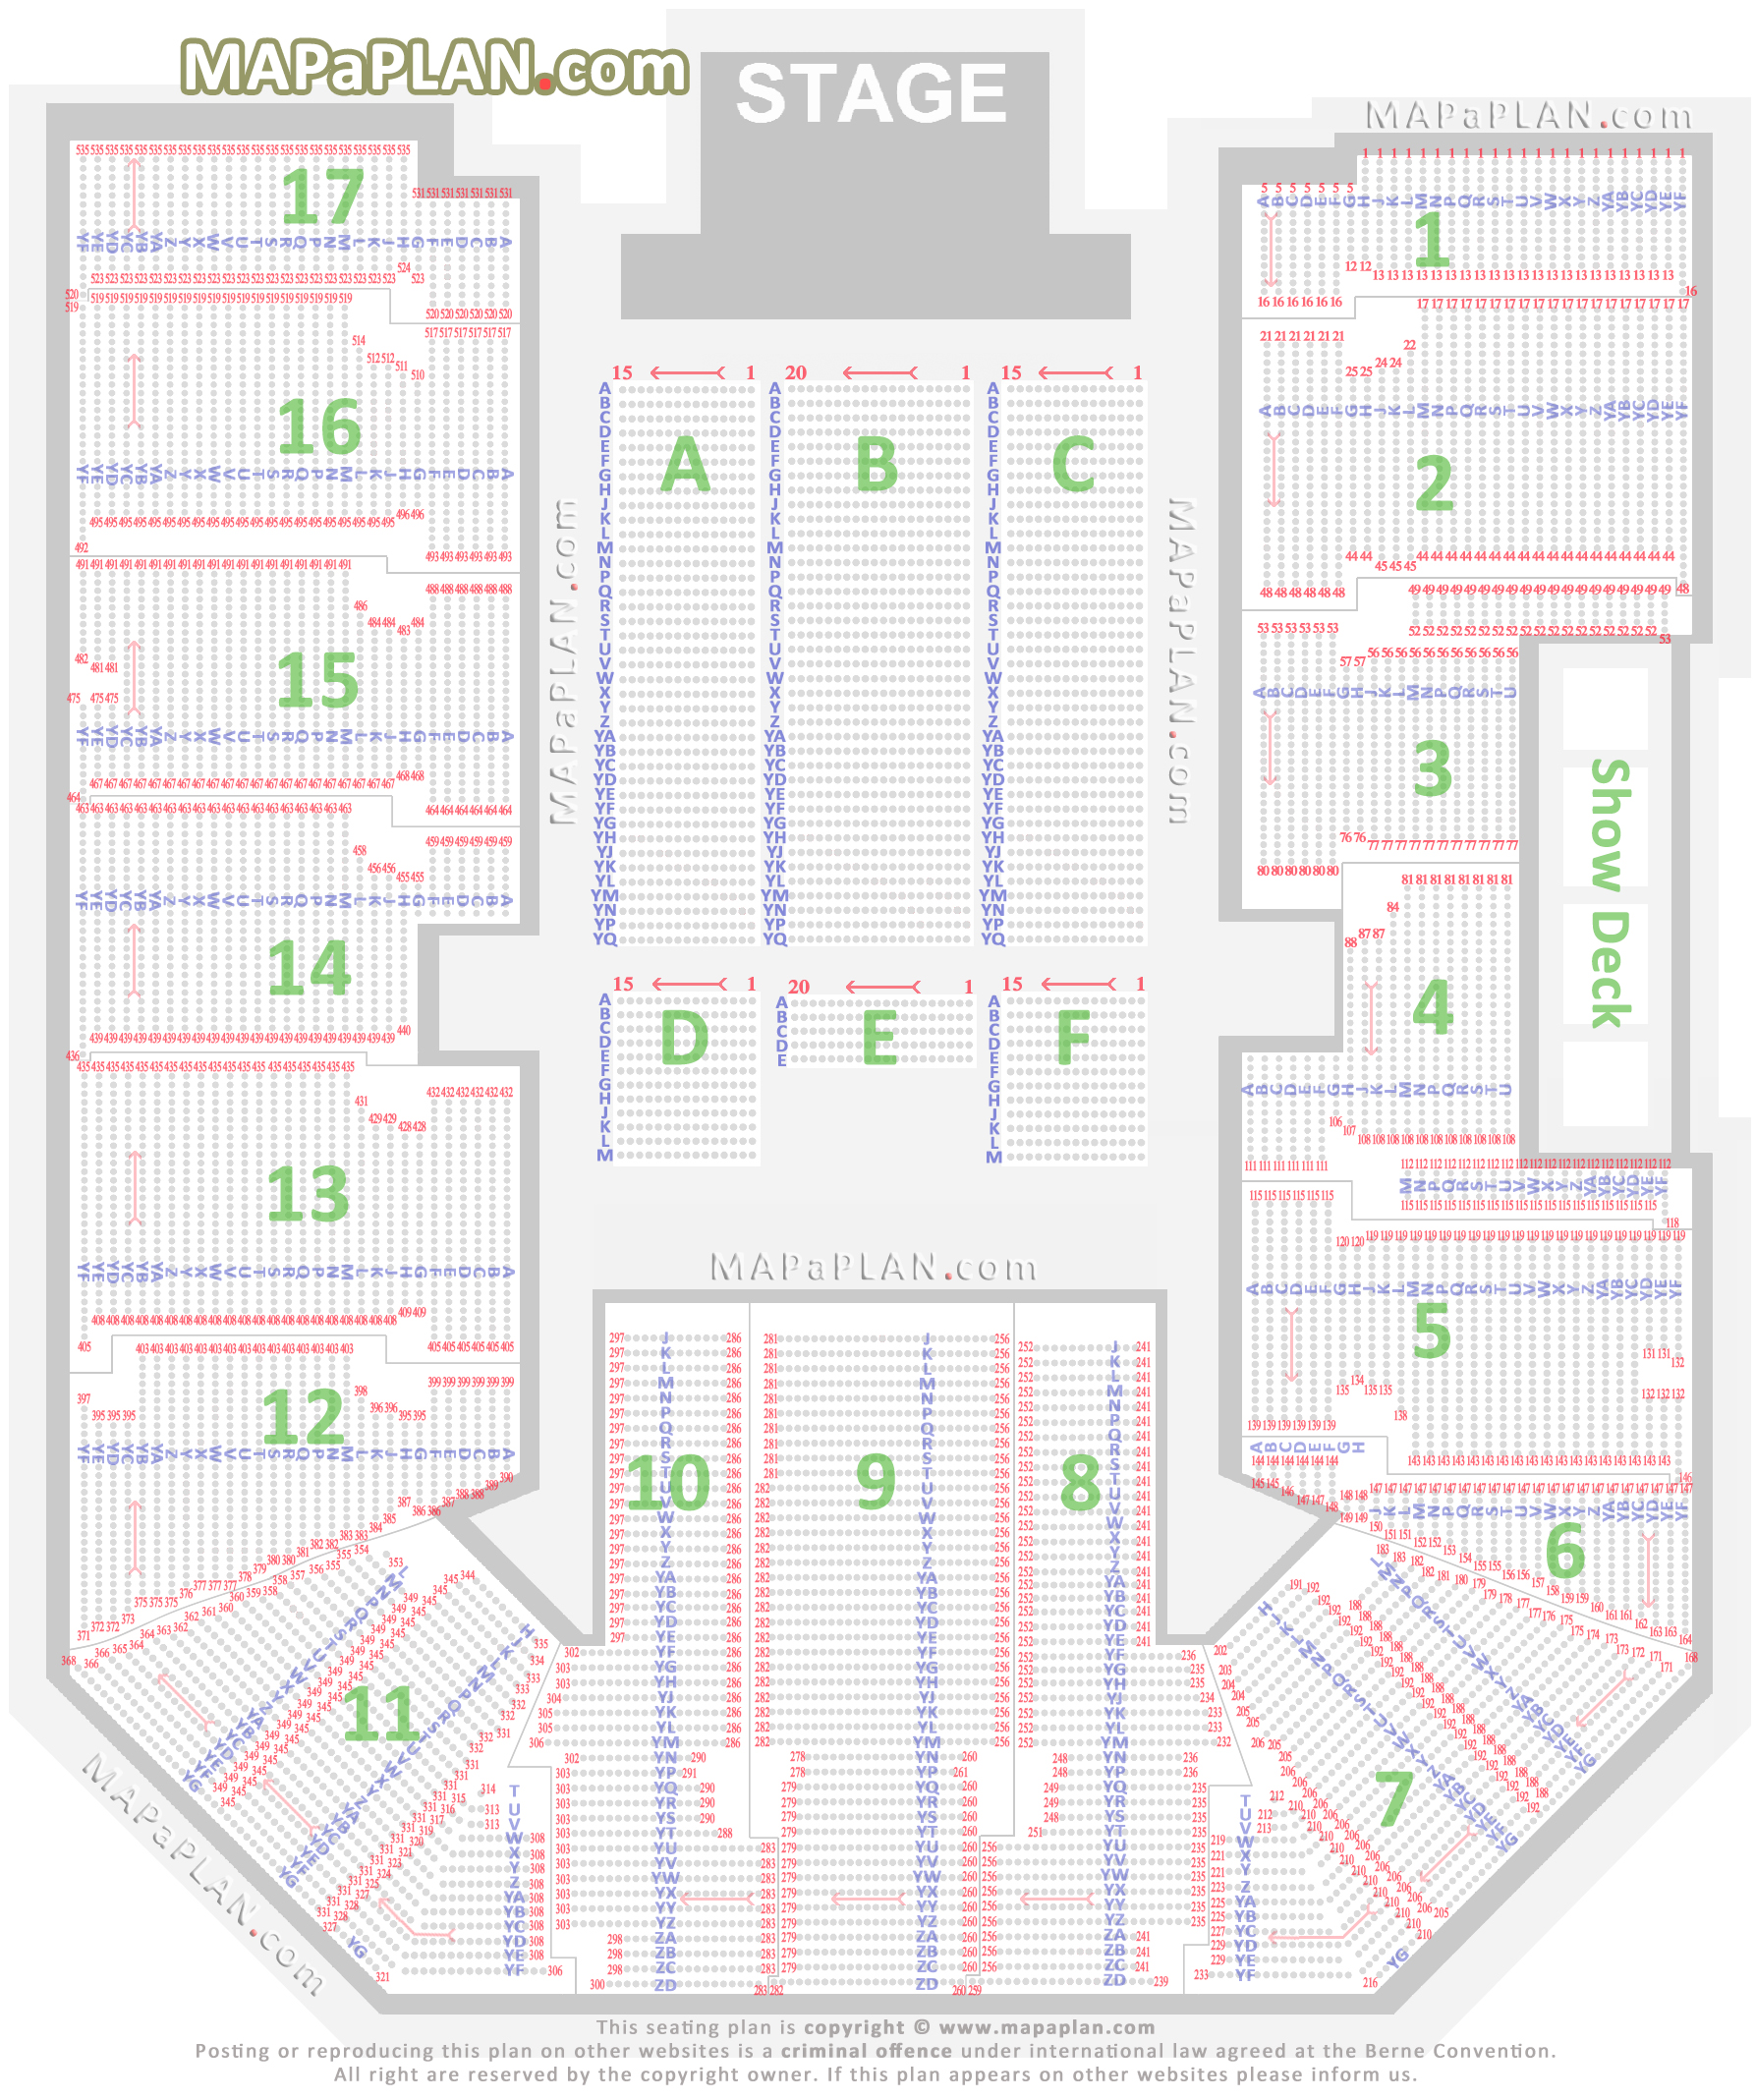 Detailed chart with individual seats rows blocks numbers Birmingham Genting NEC LG Arena seating plan